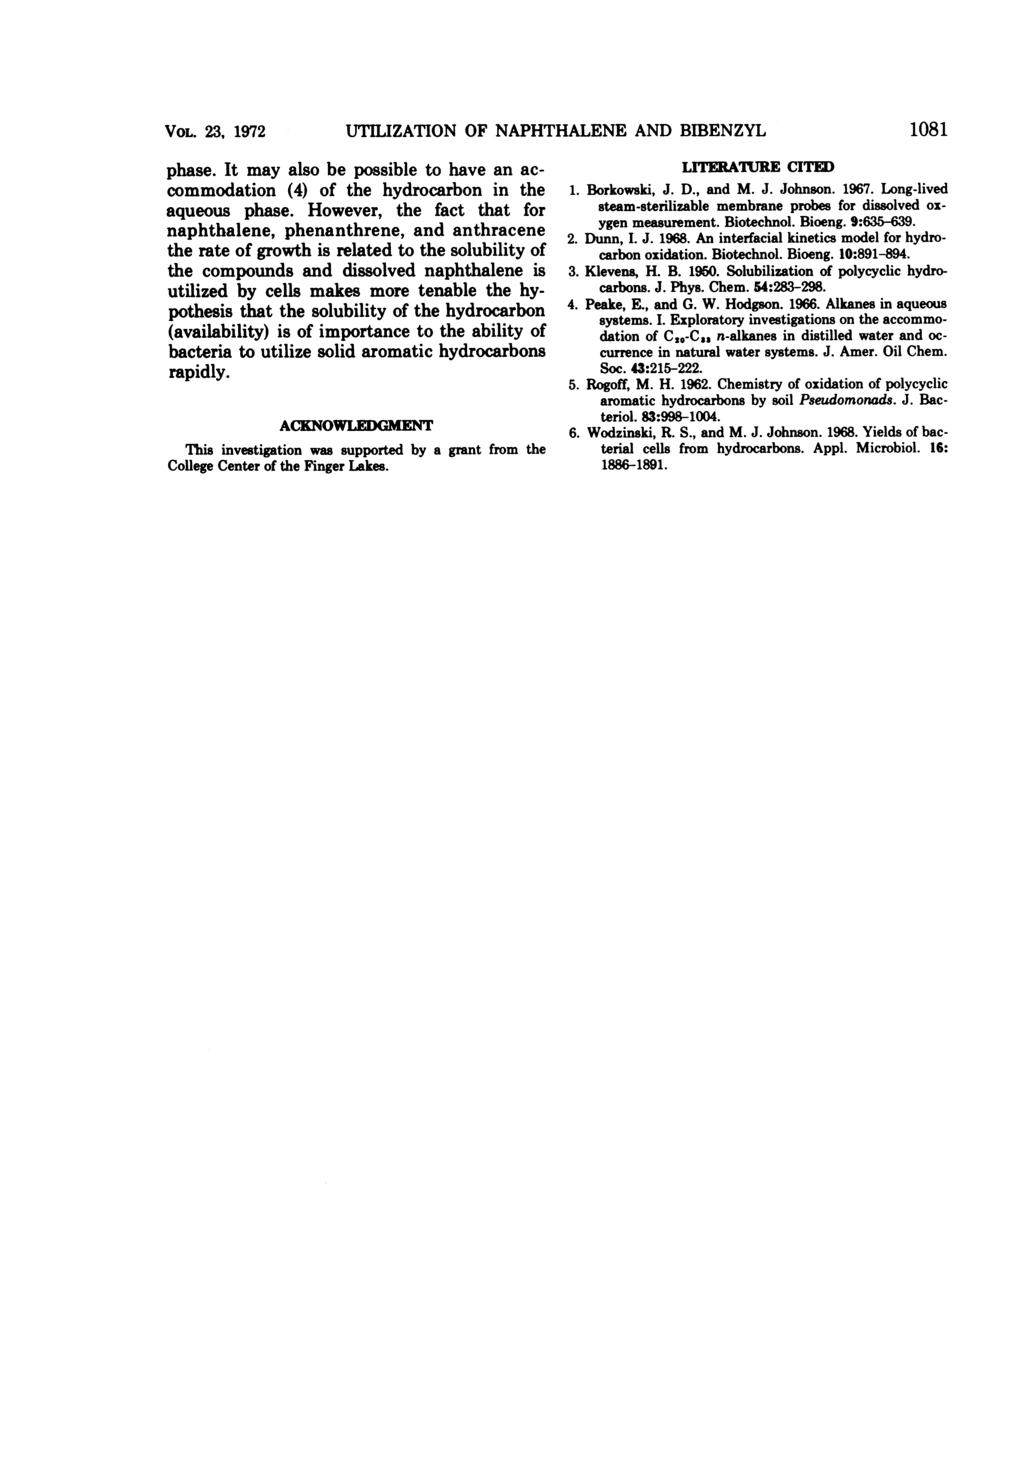 VOL. 23, 1972 UTILIZATION OF NAPHTHALENE AND BIBENZYL 1081 phase. It may also be possible to have an accommodation (4) of the hydrocarbon in the aqueous phase.